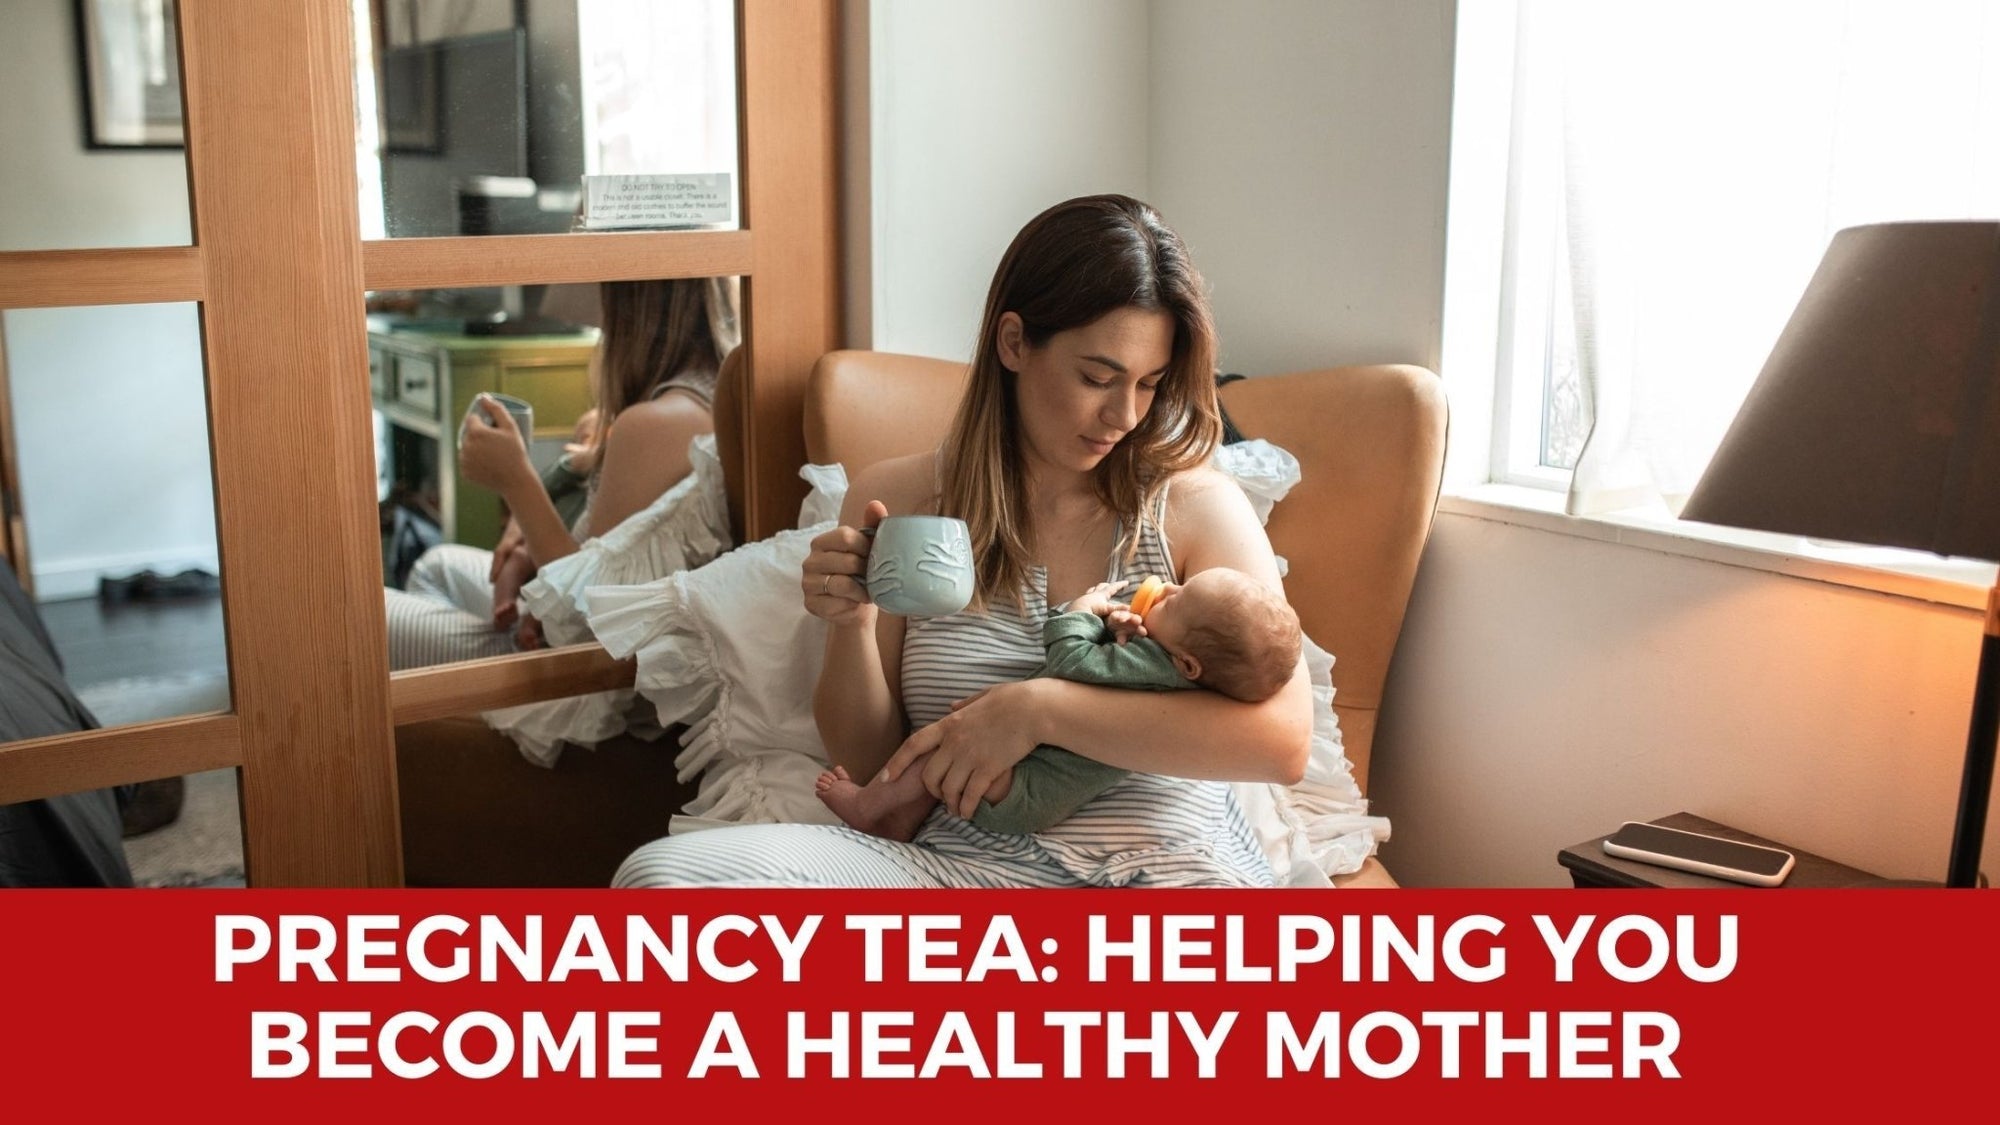 PREGNANCY TEA: HELPING YOU BECOME A HEALTHY MOTHER - Teatoxlife